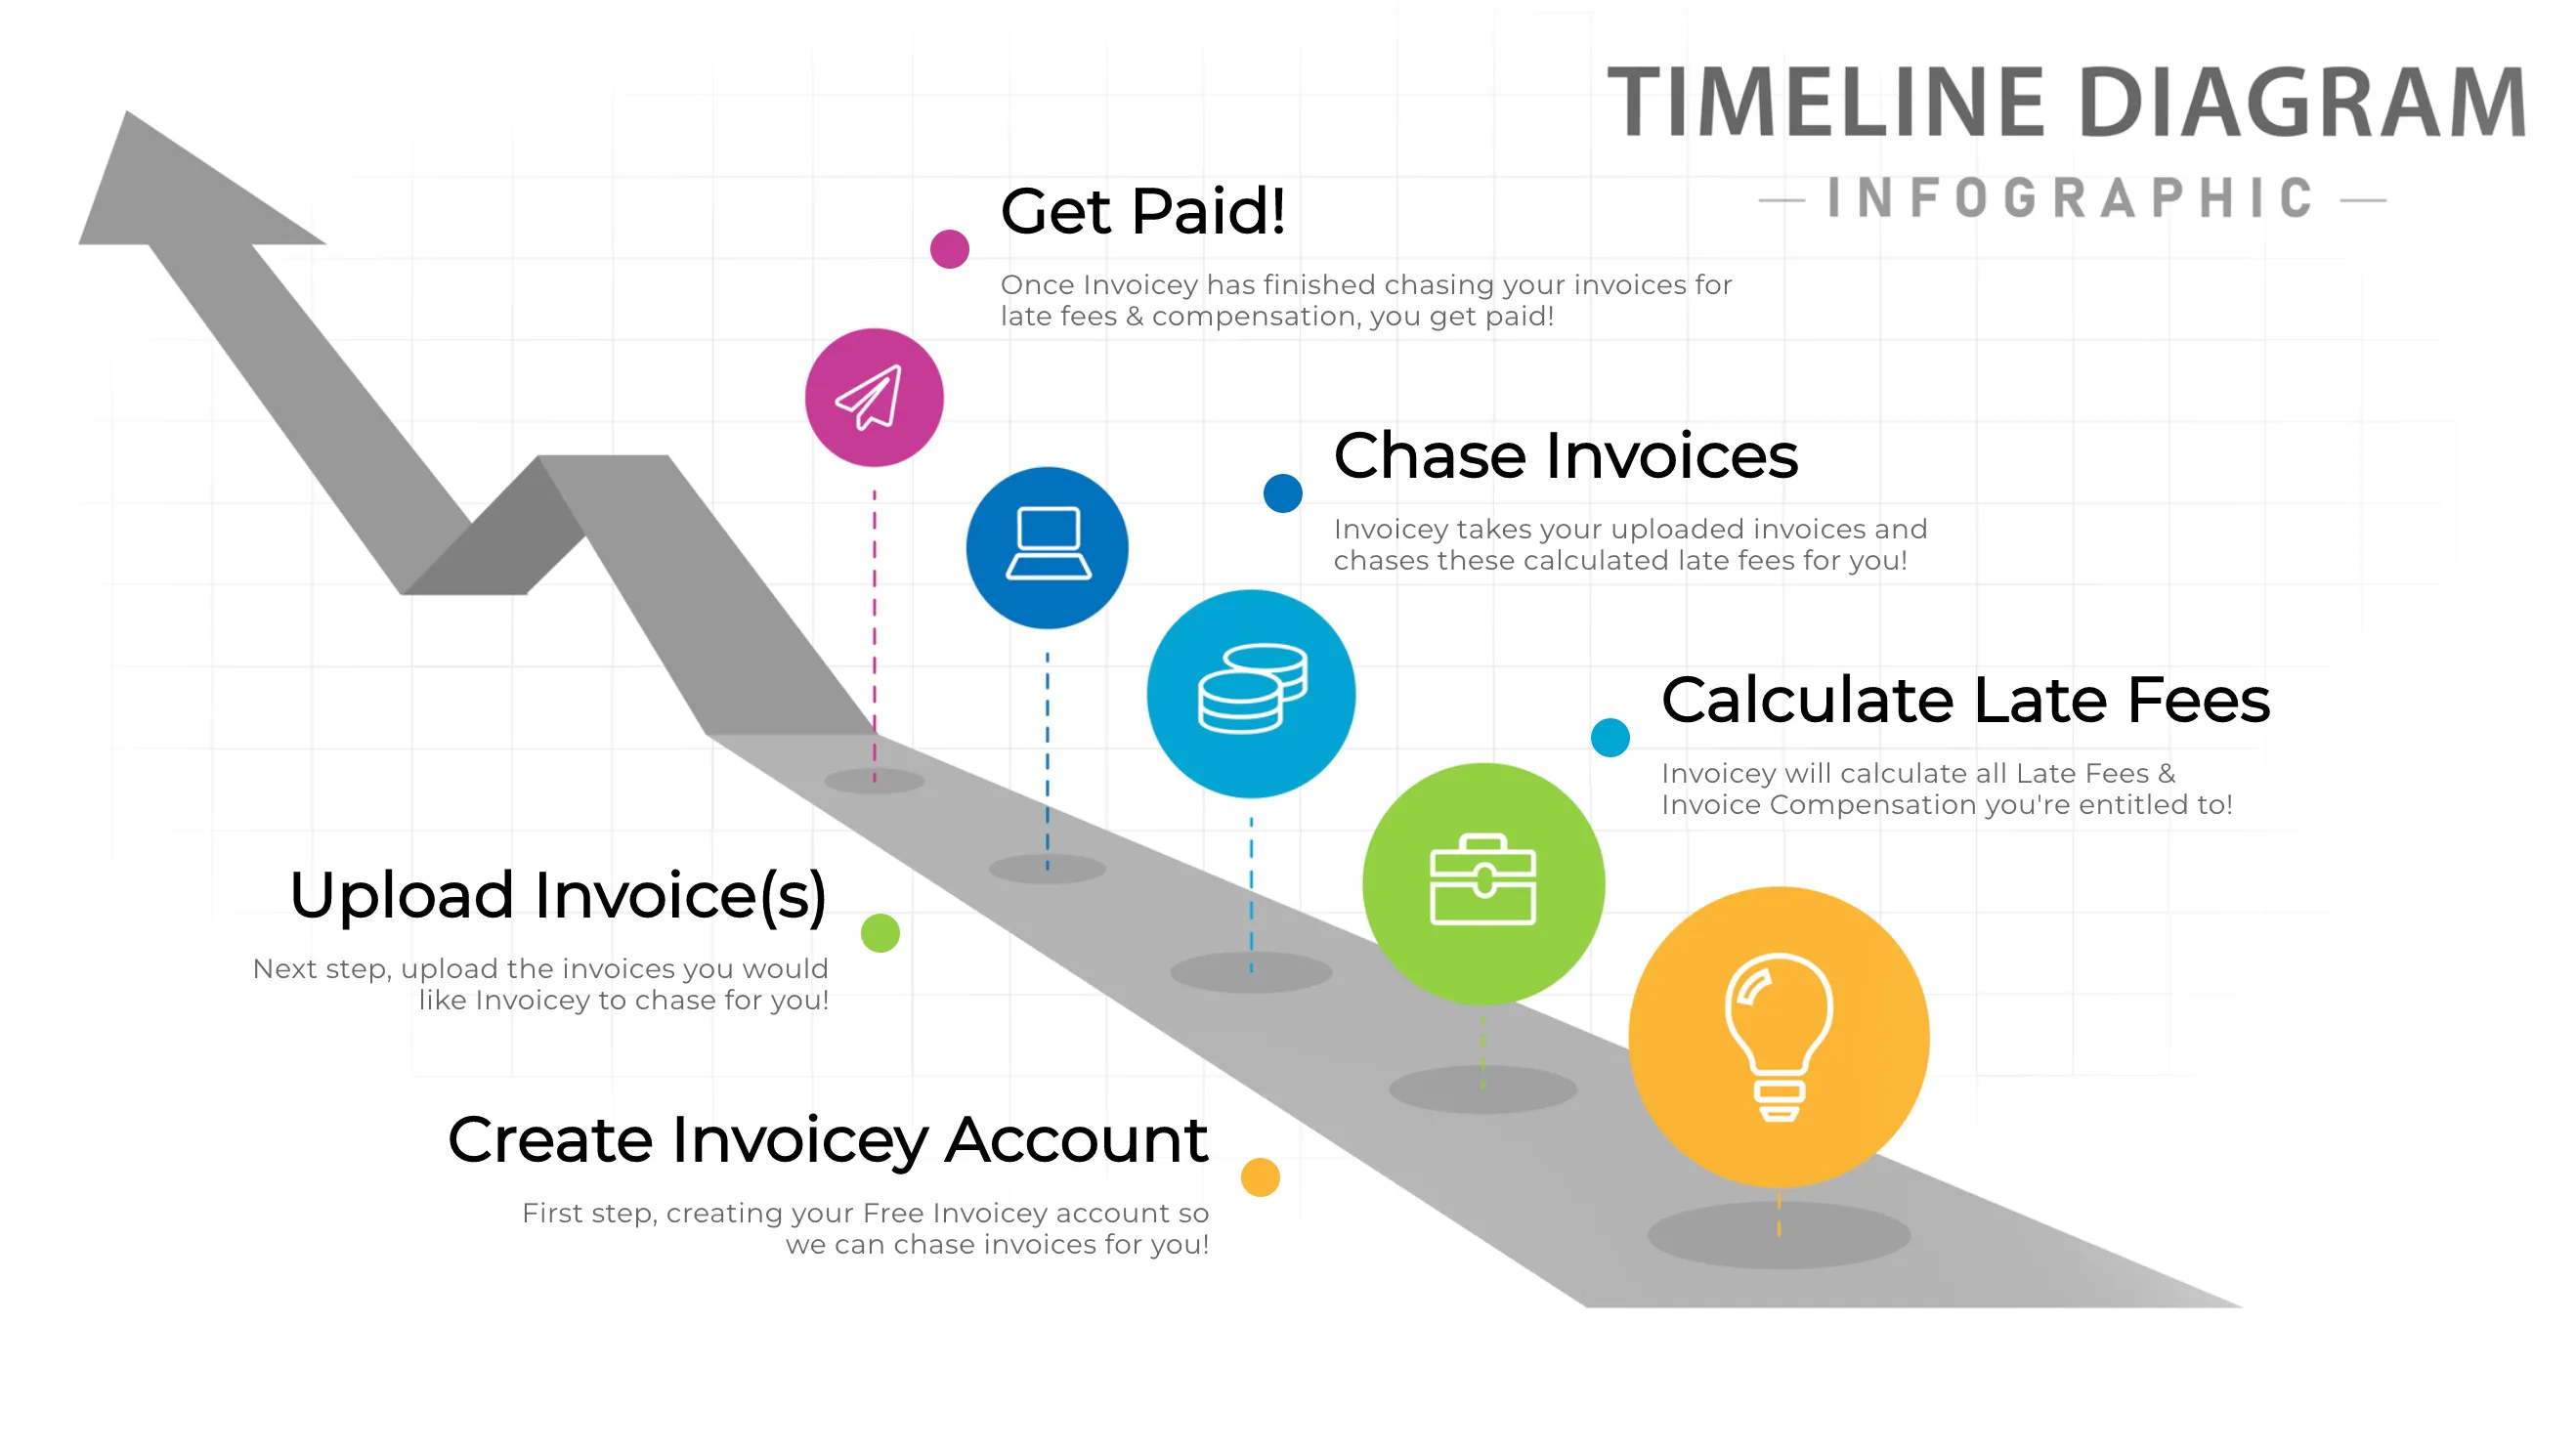 Your invoices may have locked equity in them, from late fees and compensation. Increase your companies cash flow by releasing this locked equity using Invoicey's automated invoice chasing software.